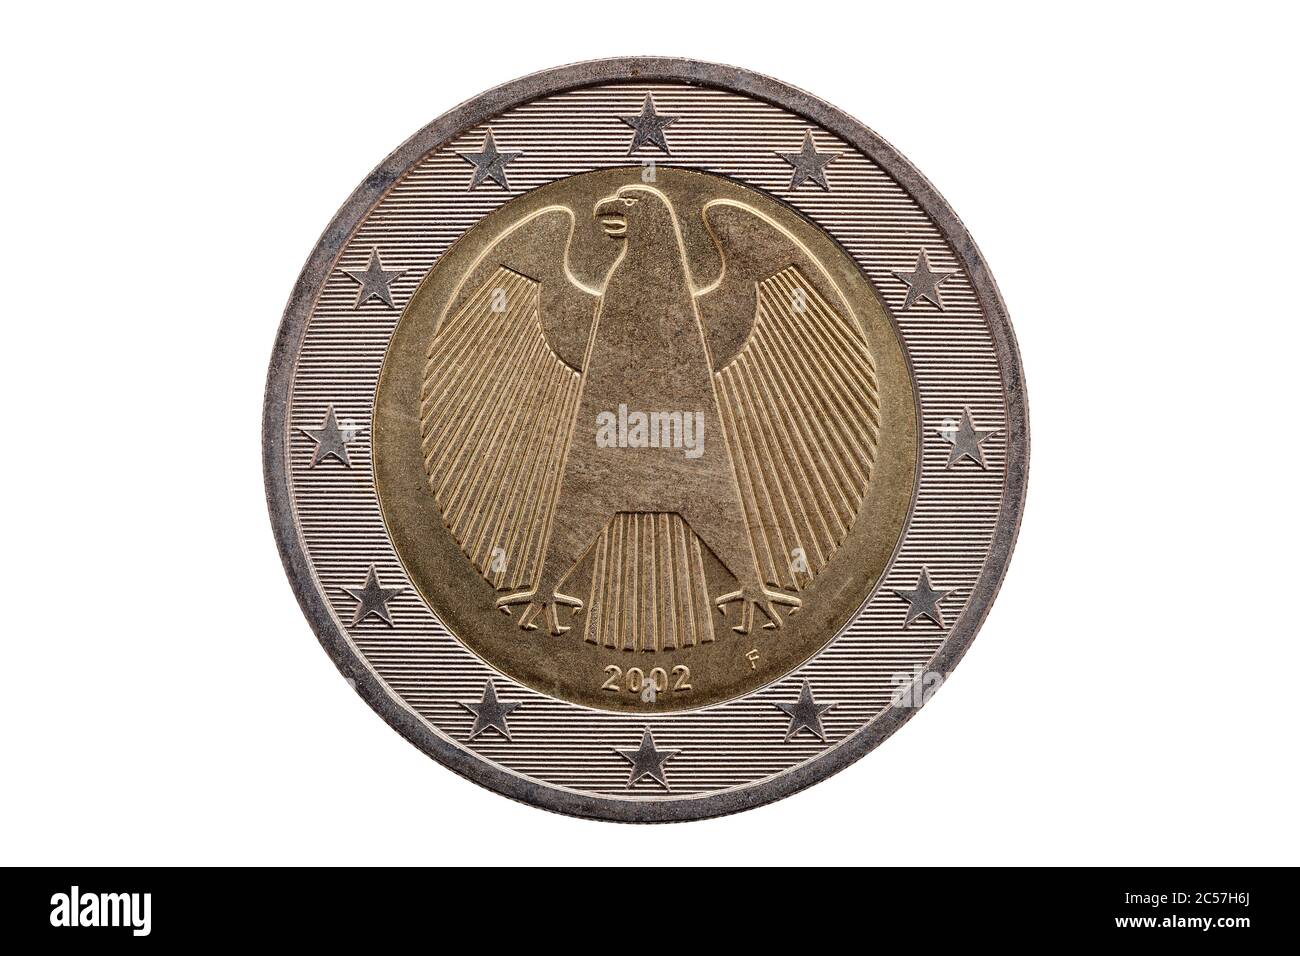 Reverse side of a Two Euro coin of Germany dated 2002 which shows the German eagle cut out and isolated on a white background Stock Photo